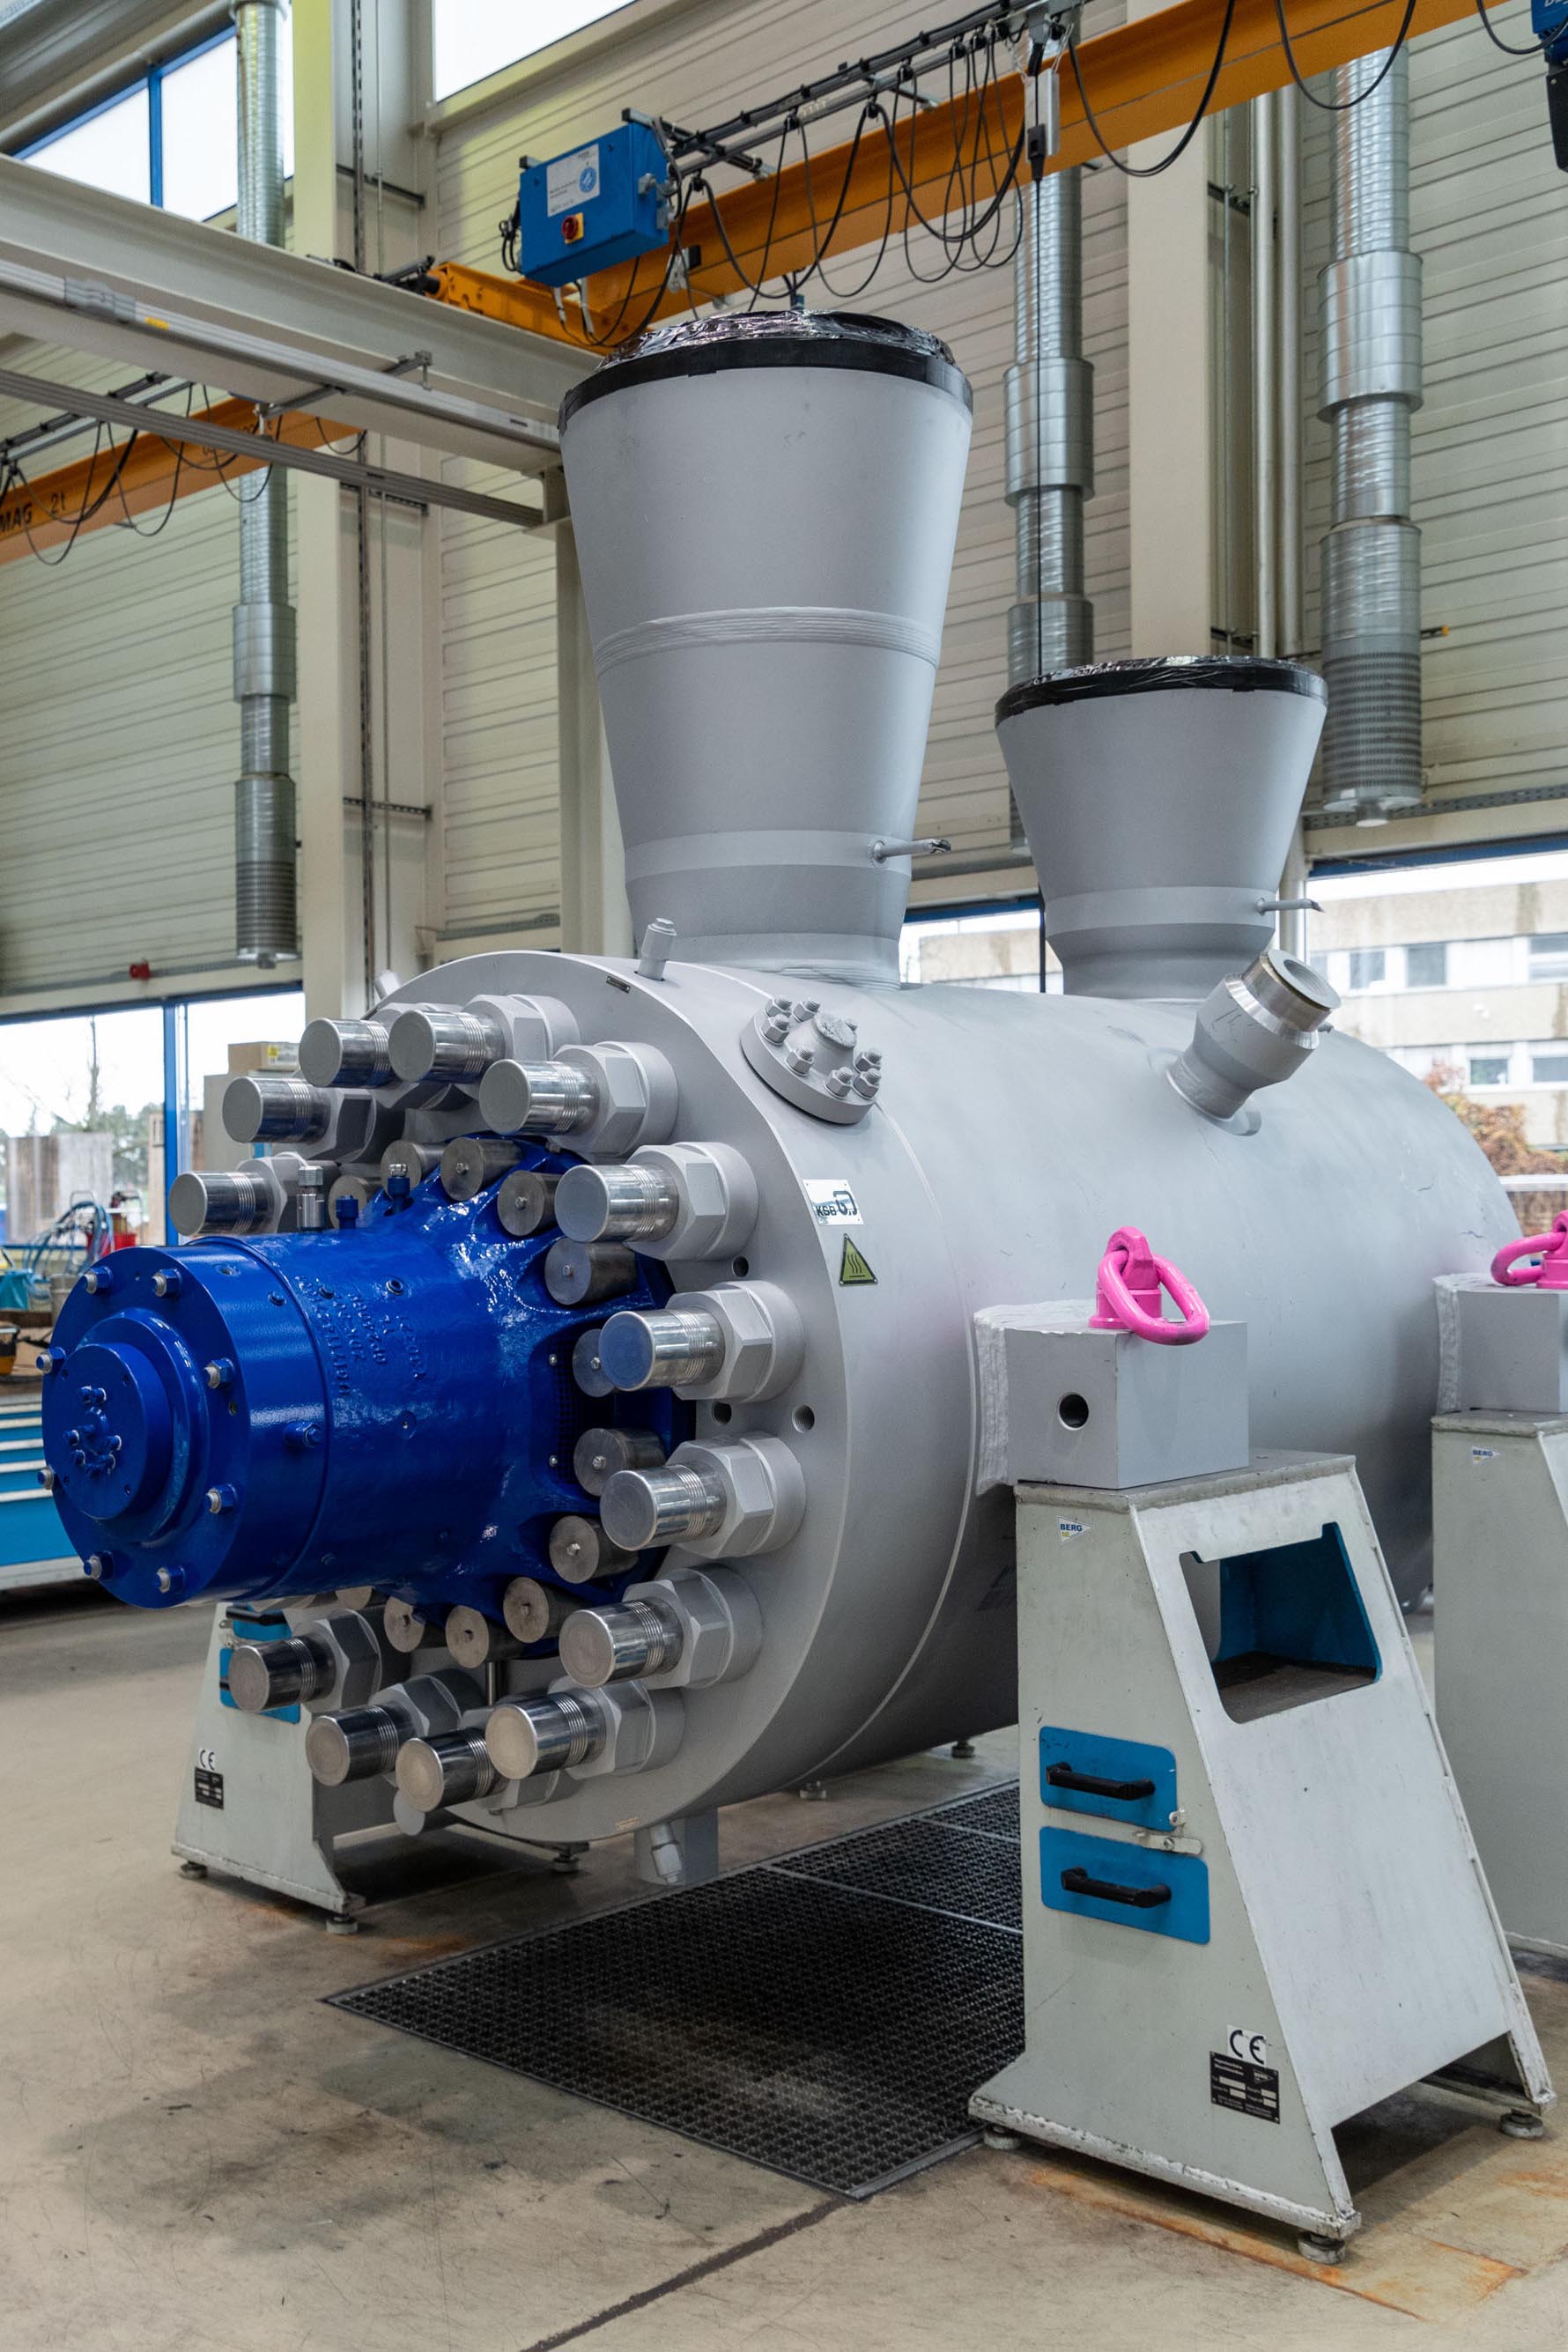 The KSB CHTD 11/5 boiler feed pump will be used in the new coal-fired power plant currently being built in Huaibei, China. (Image: KSB)